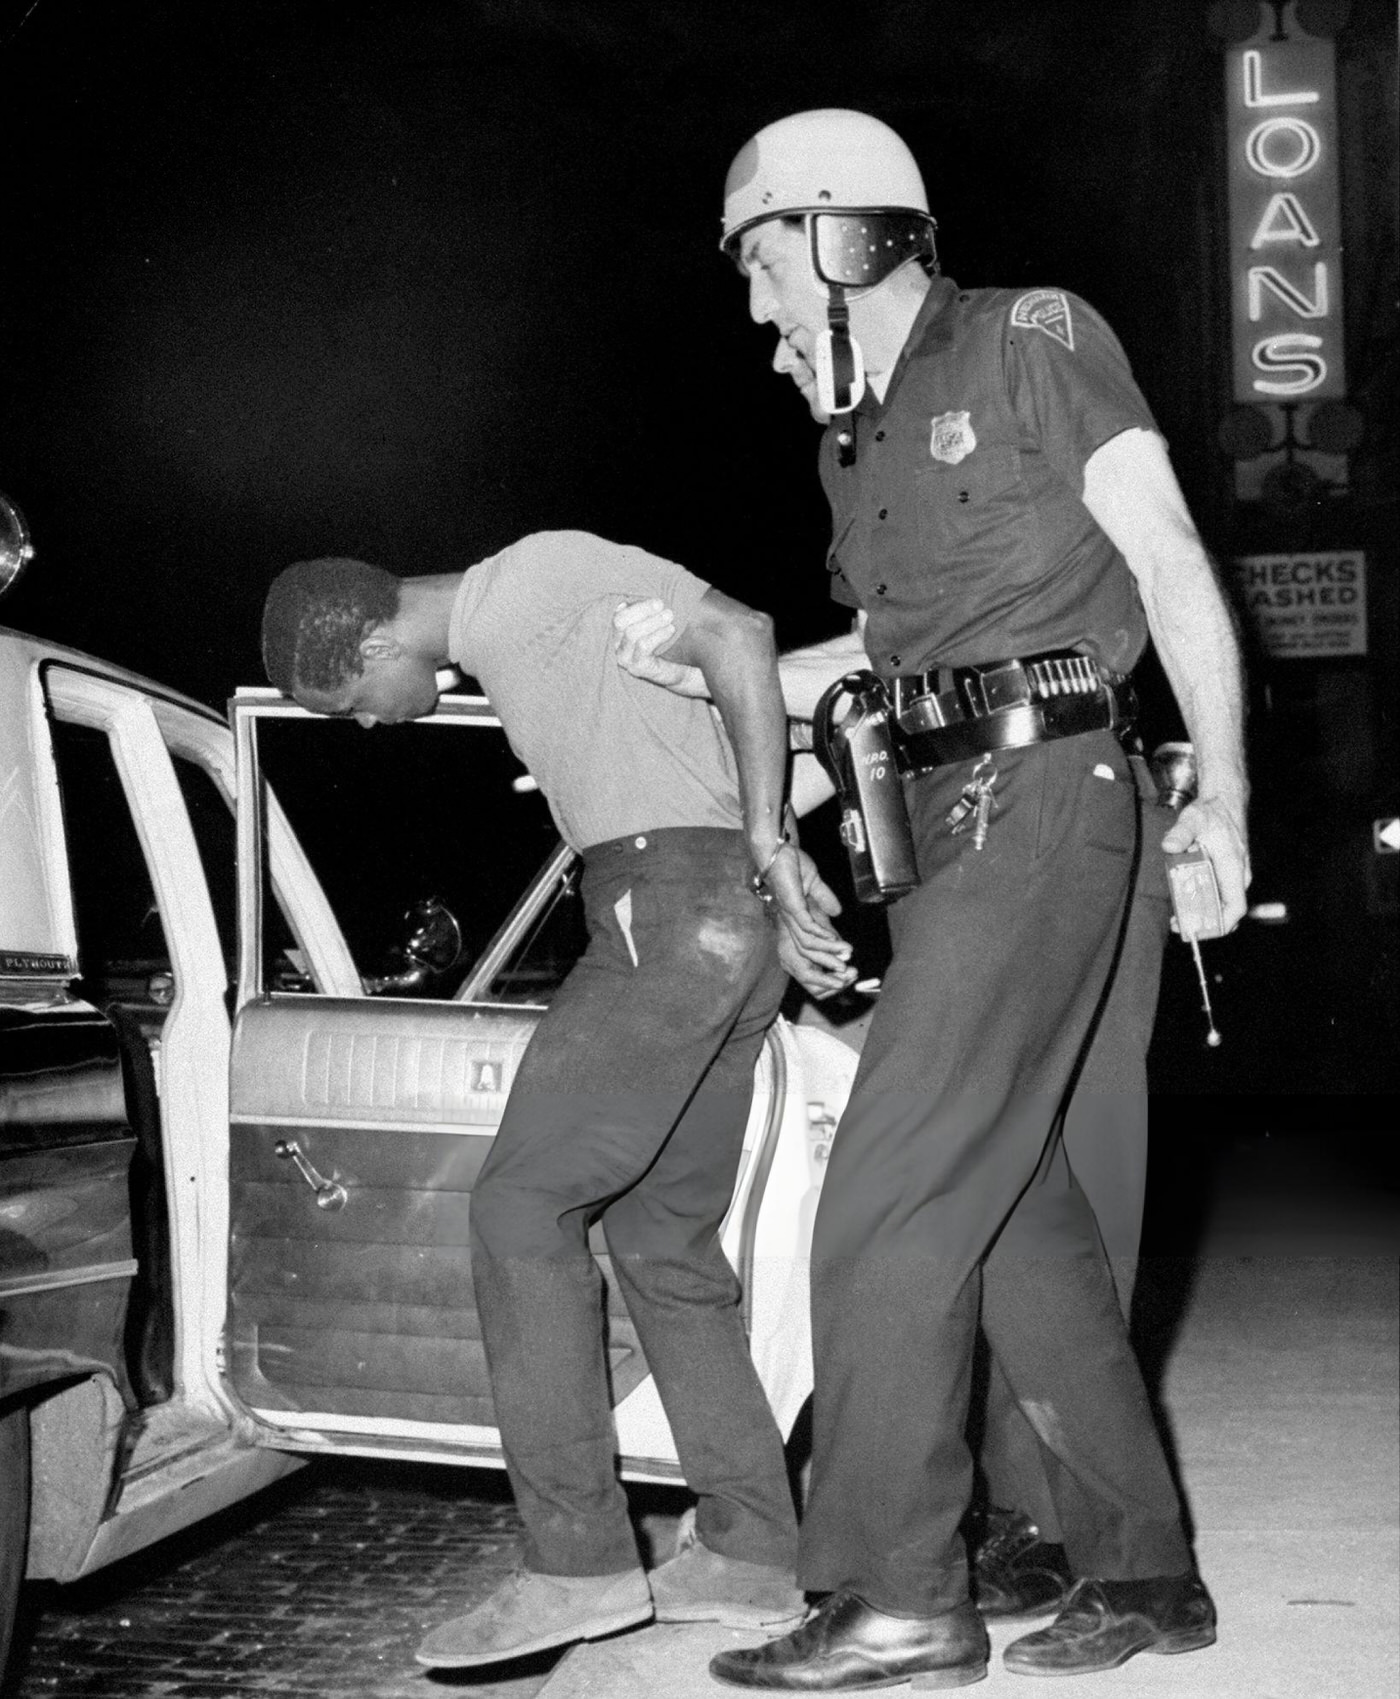 Newark Police arrest a looter at Springfield Ave. and Mercer St. during riots